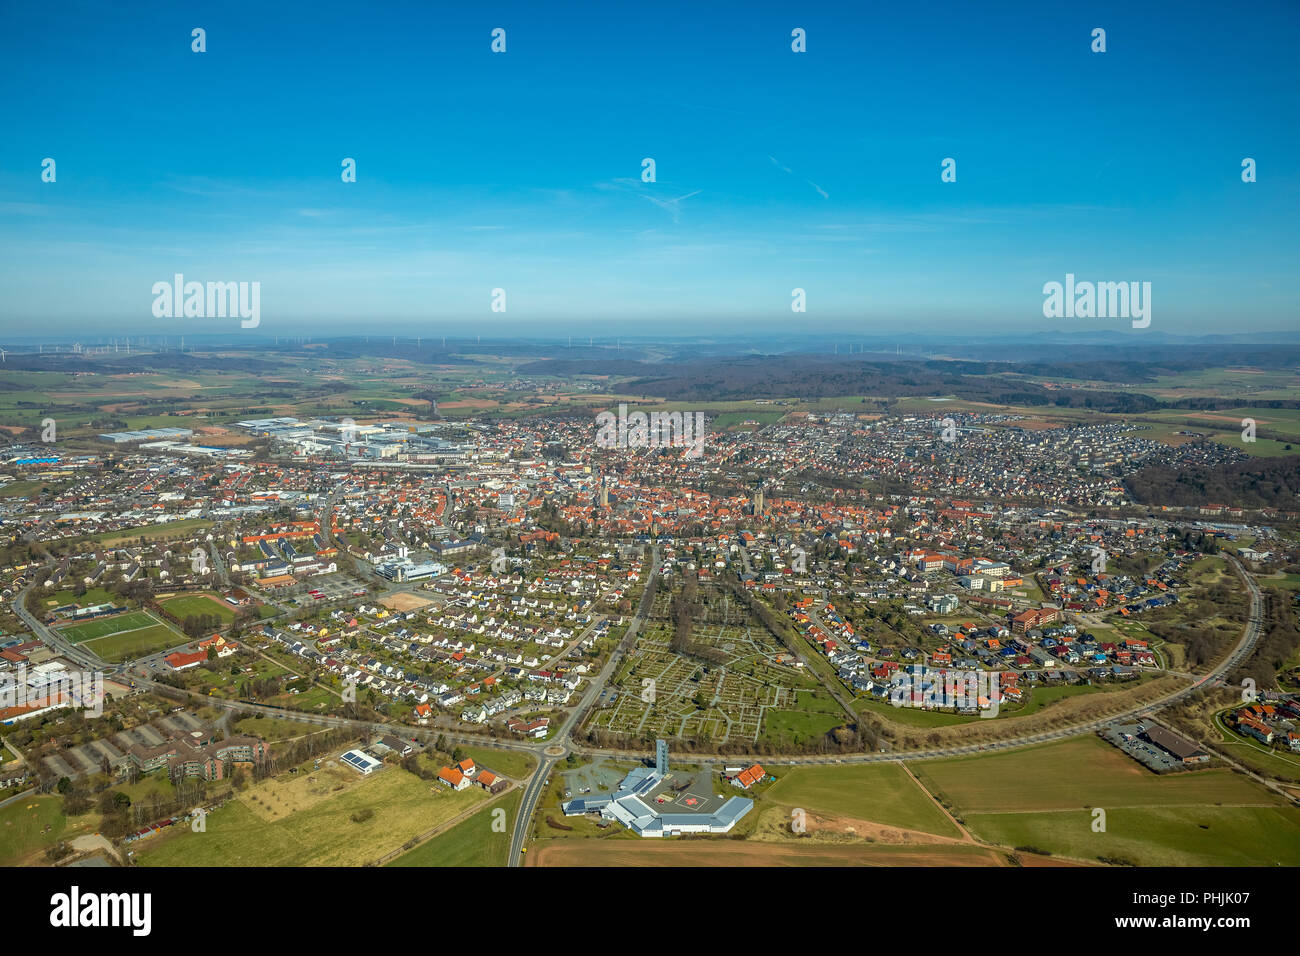 View of Korbach over the Südring in Korbach. District town Korbach, district Waldeck-Frankenberg in Hessen, Germany, district town Korbach, Europe, ae Stock Photo